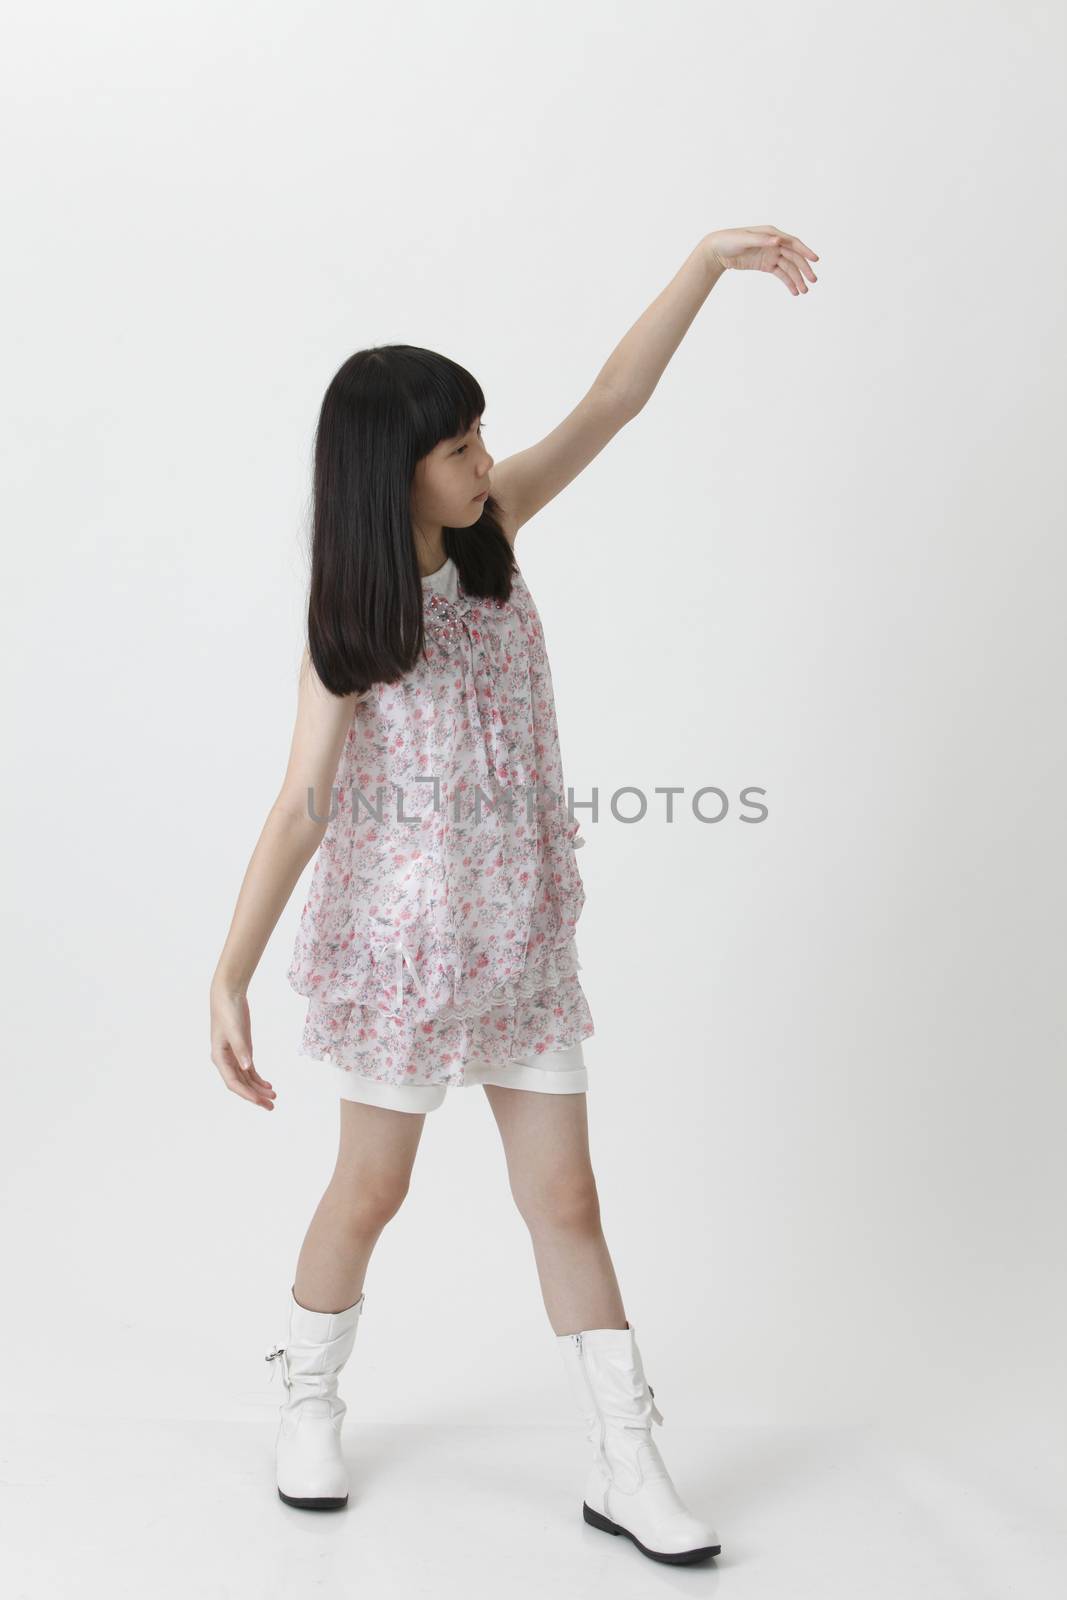 chinese girl practicing kung fu